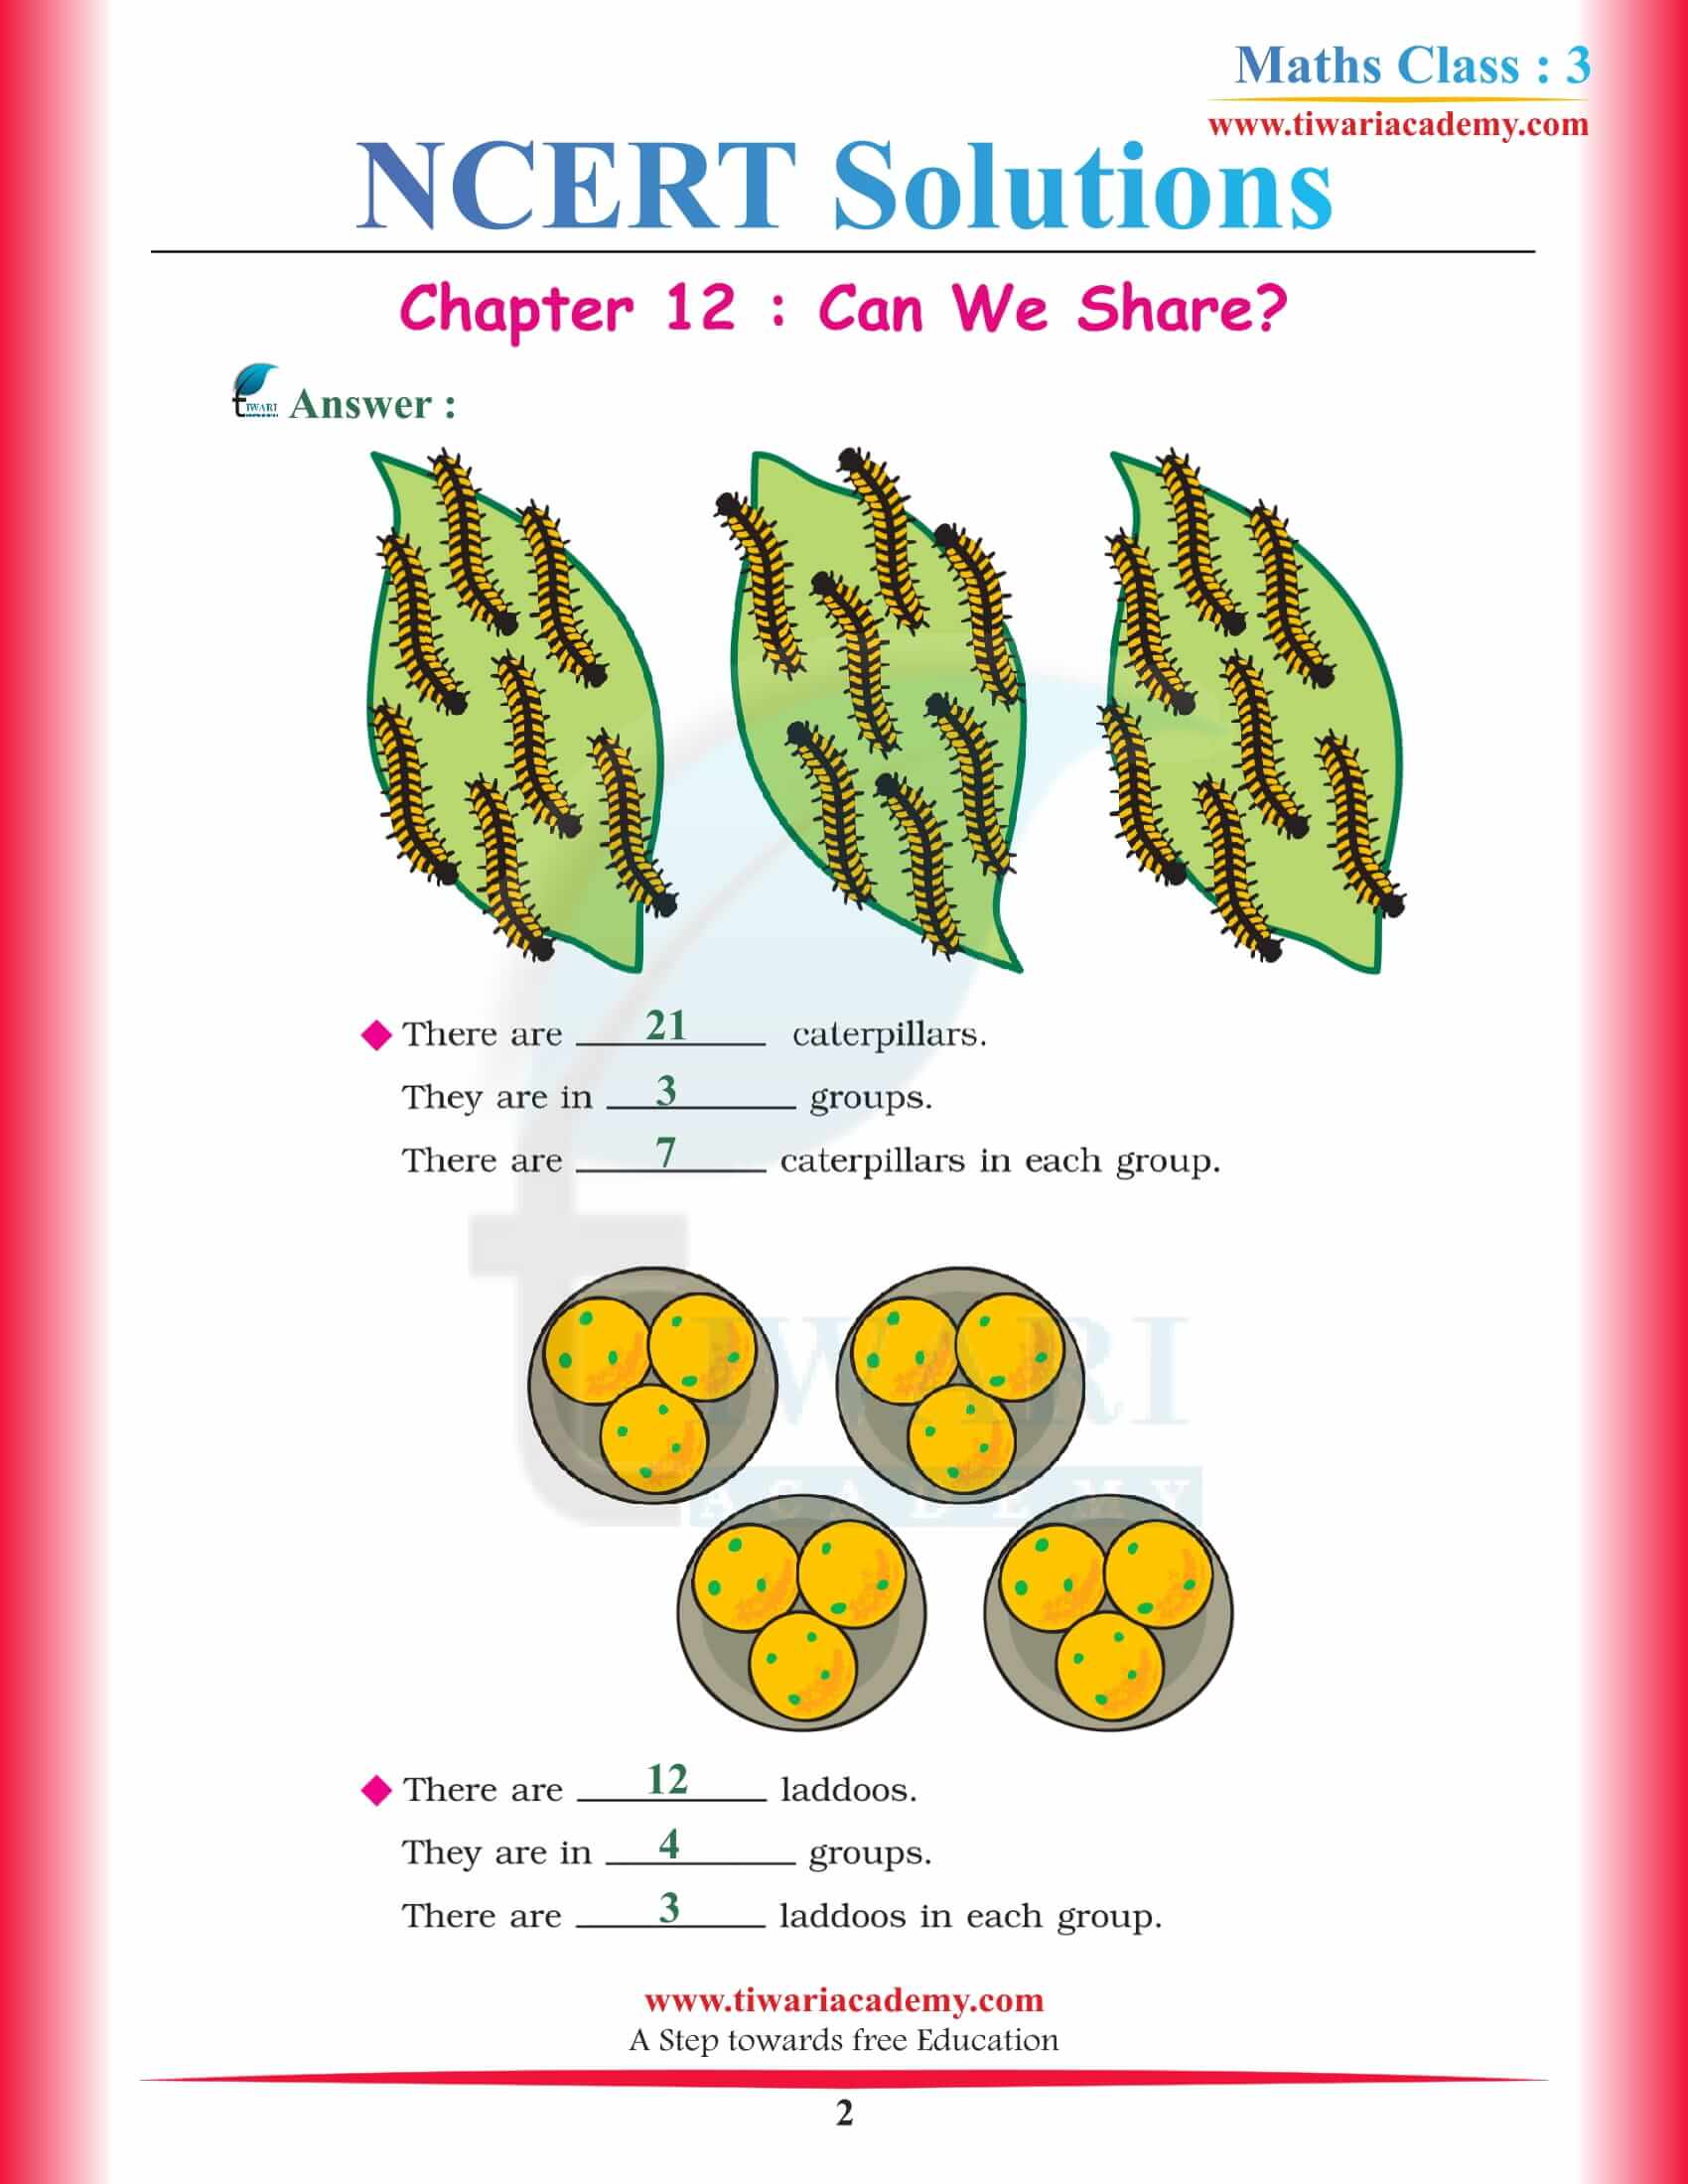 NCERT Solutions for Class 3 Maths Chapter 12 Can we Share? in PDF